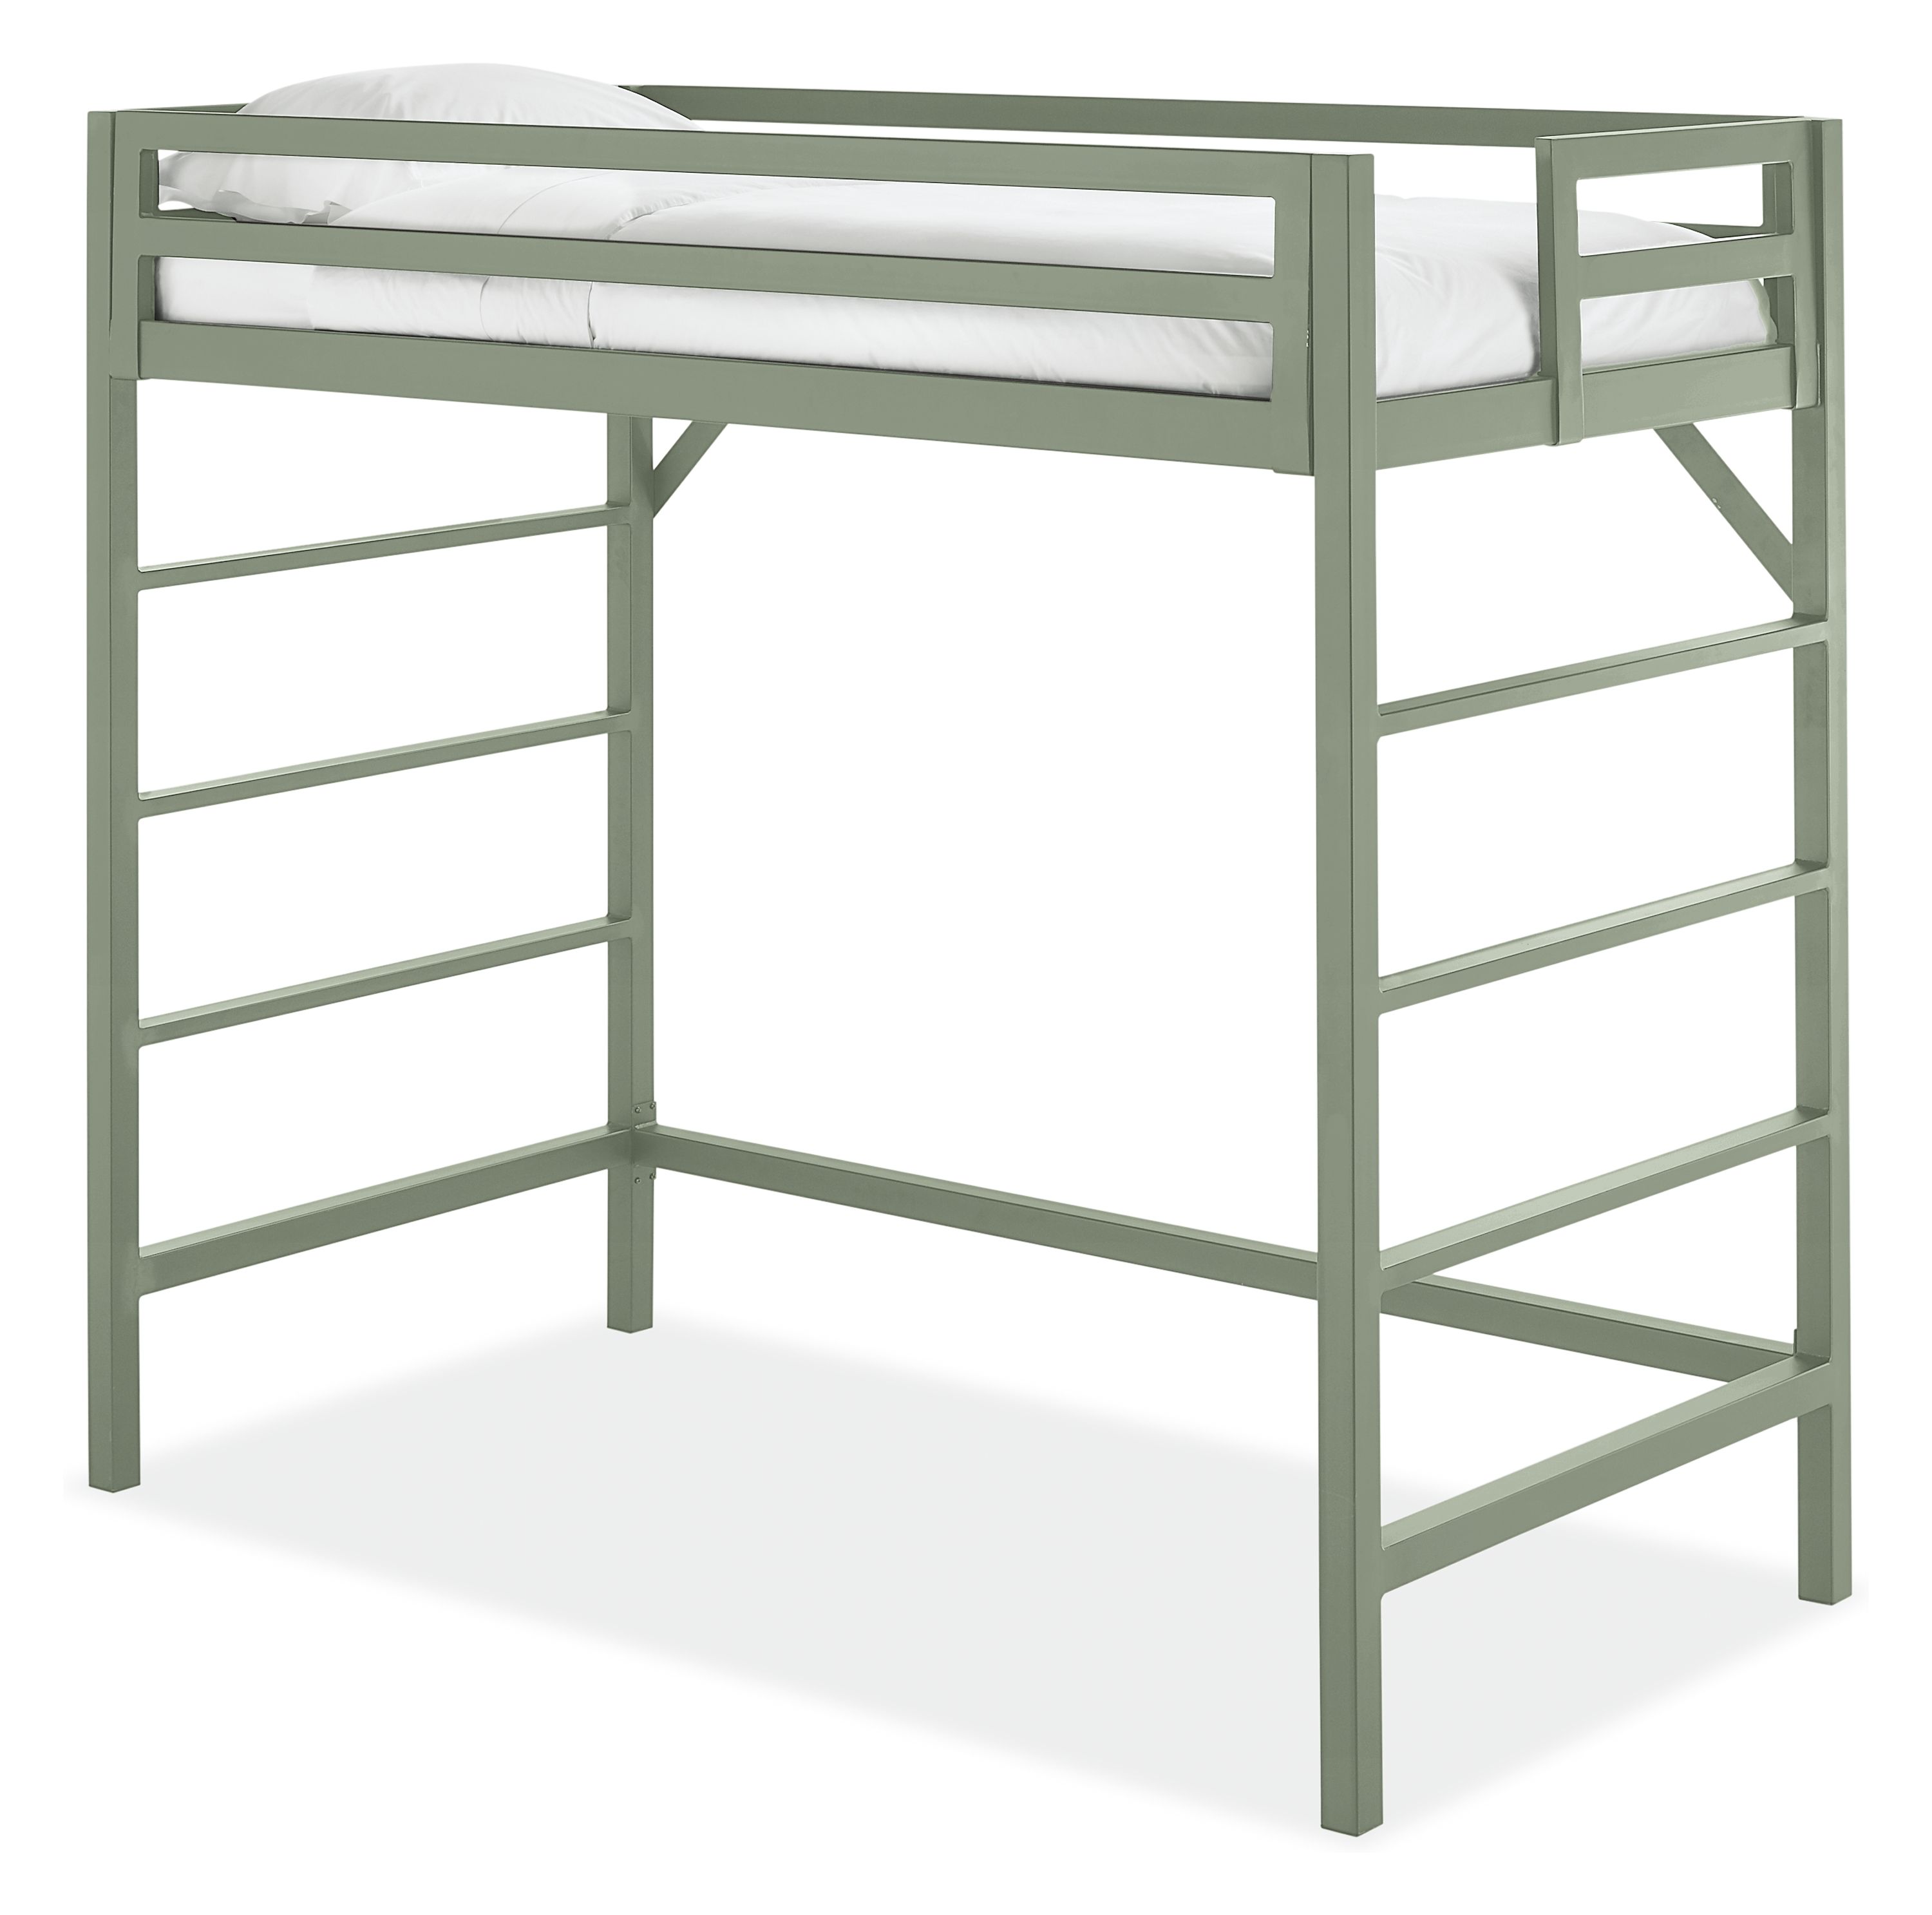 Chase Loft Bed In Colors Twin, Piper Perri Bunk Bed